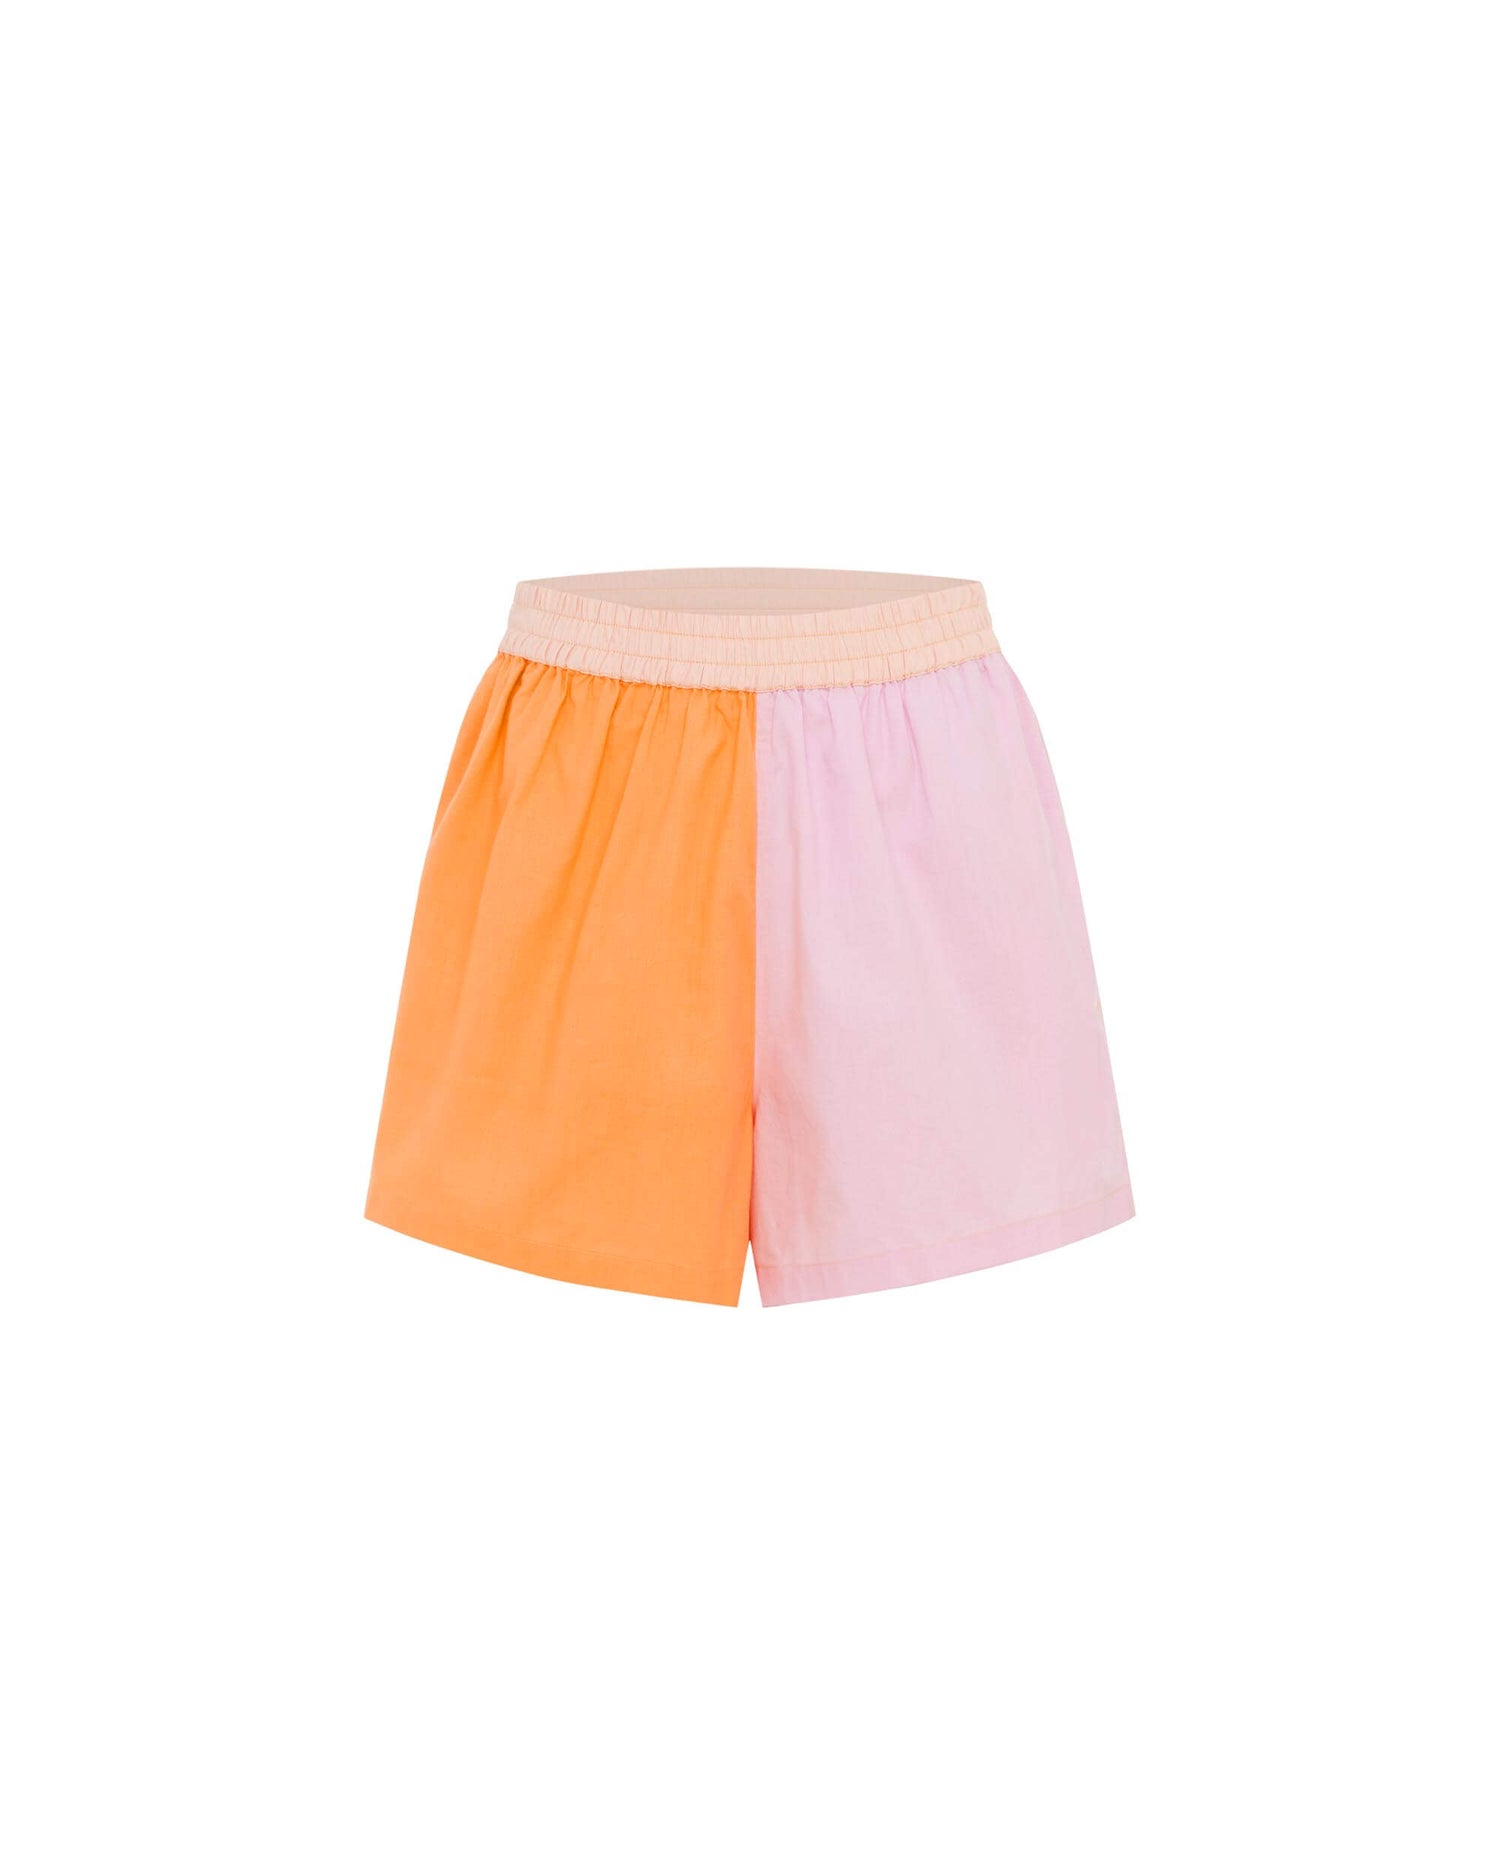 It's Now Cool Beachwear - Short Vacay - Sunkissed